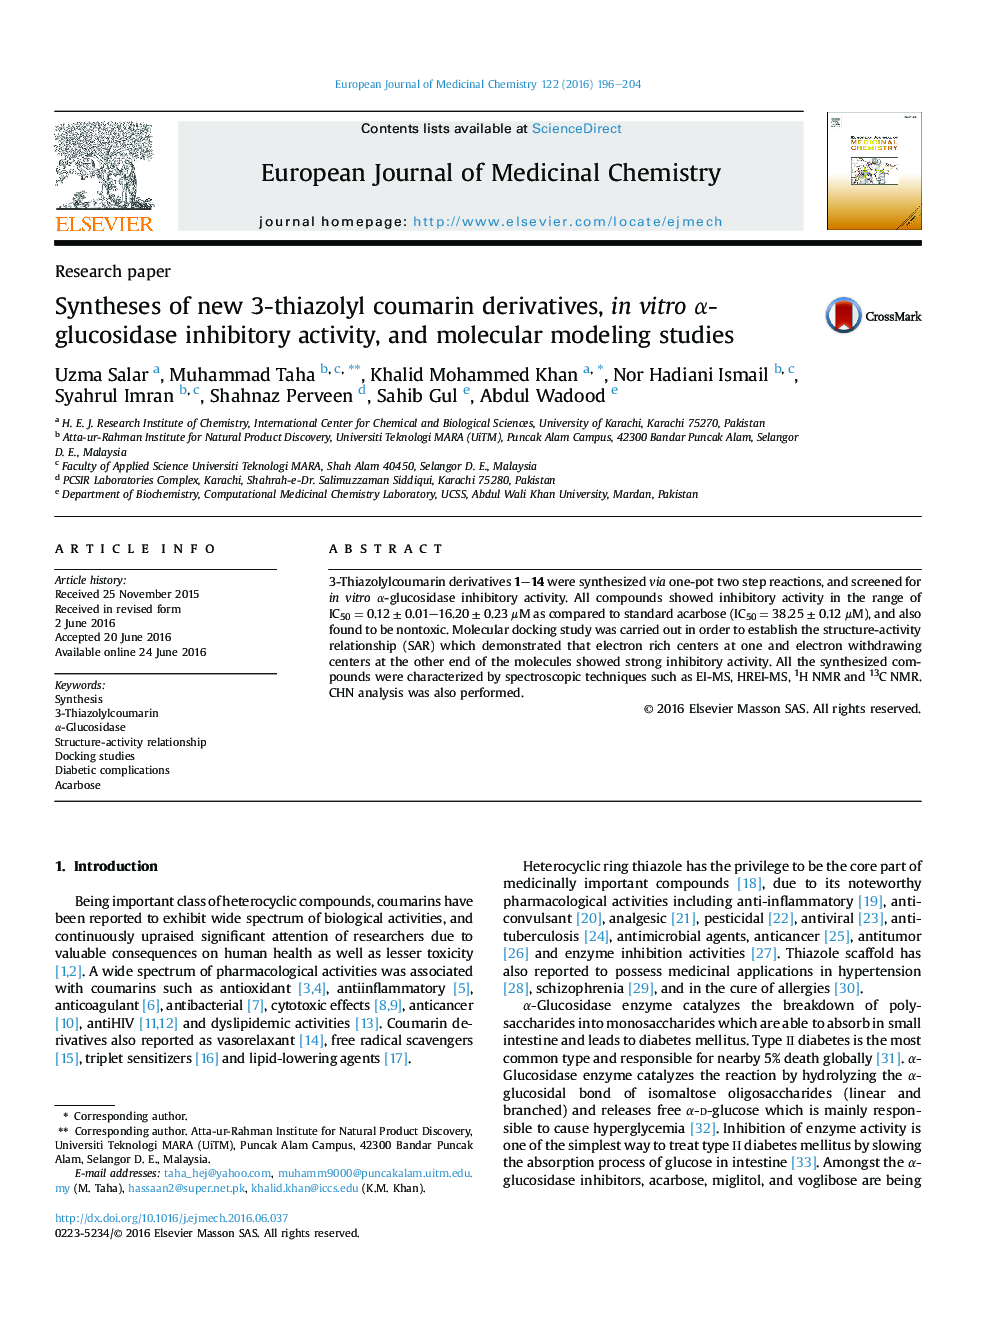 Syntheses of new 3-thiazolyl coumarin derivatives, in vitro α-glucosidase inhibitory activity, and molecular modeling studies